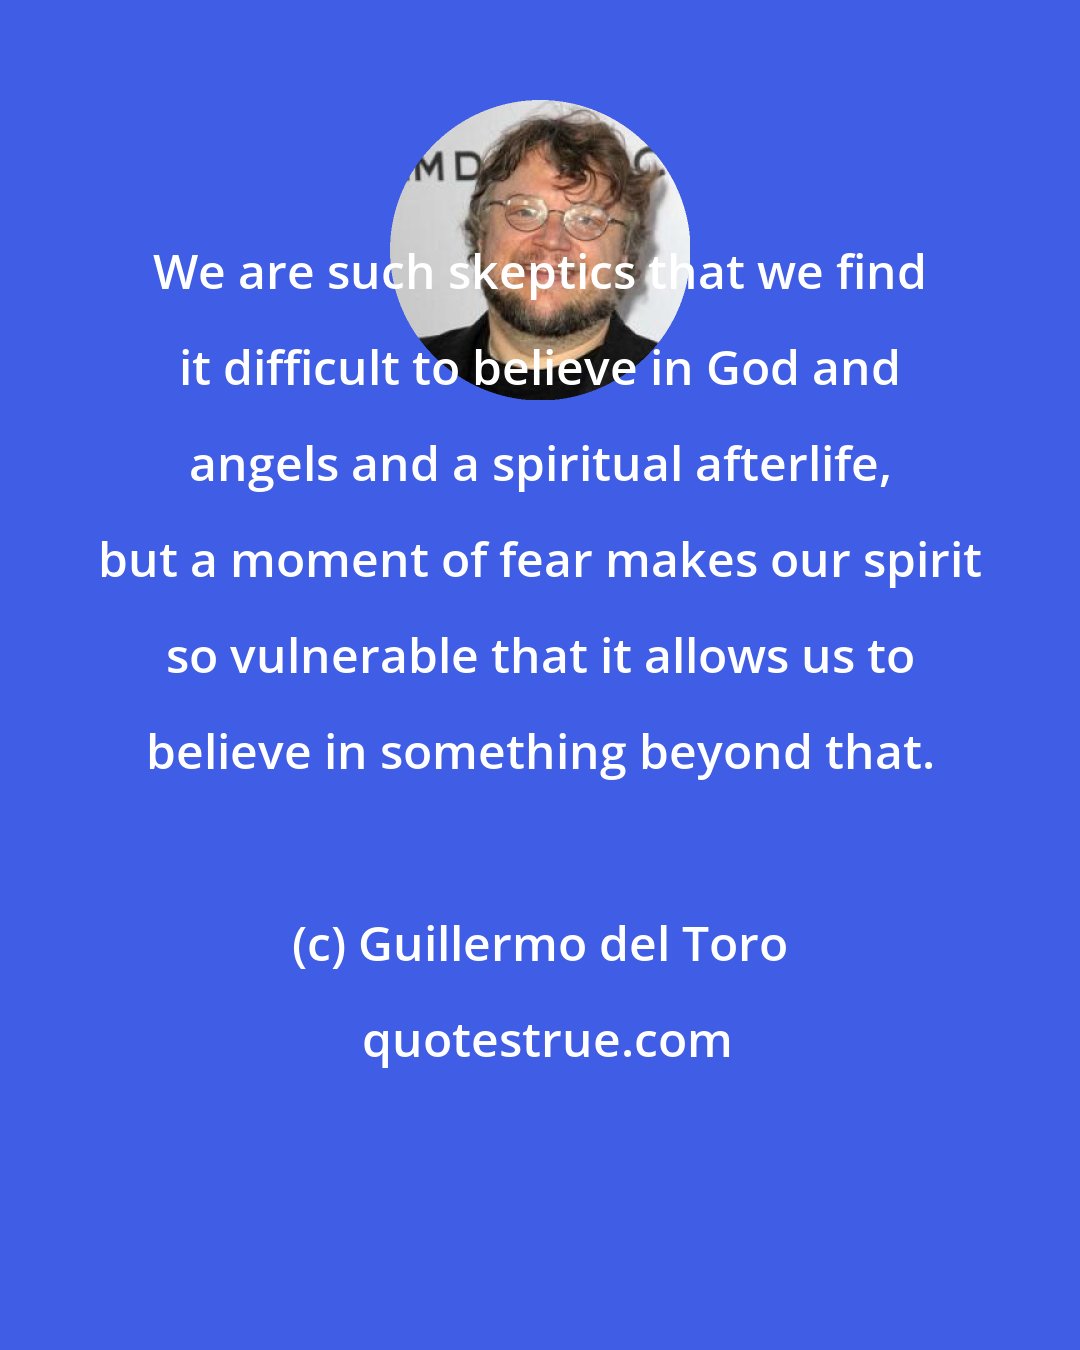 Guillermo del Toro: We are such skeptics that we find it difficult to believe in God and angels and a spiritual afterlife, but a moment of fear makes our spirit so vulnerable that it allows us to believe in something beyond that.